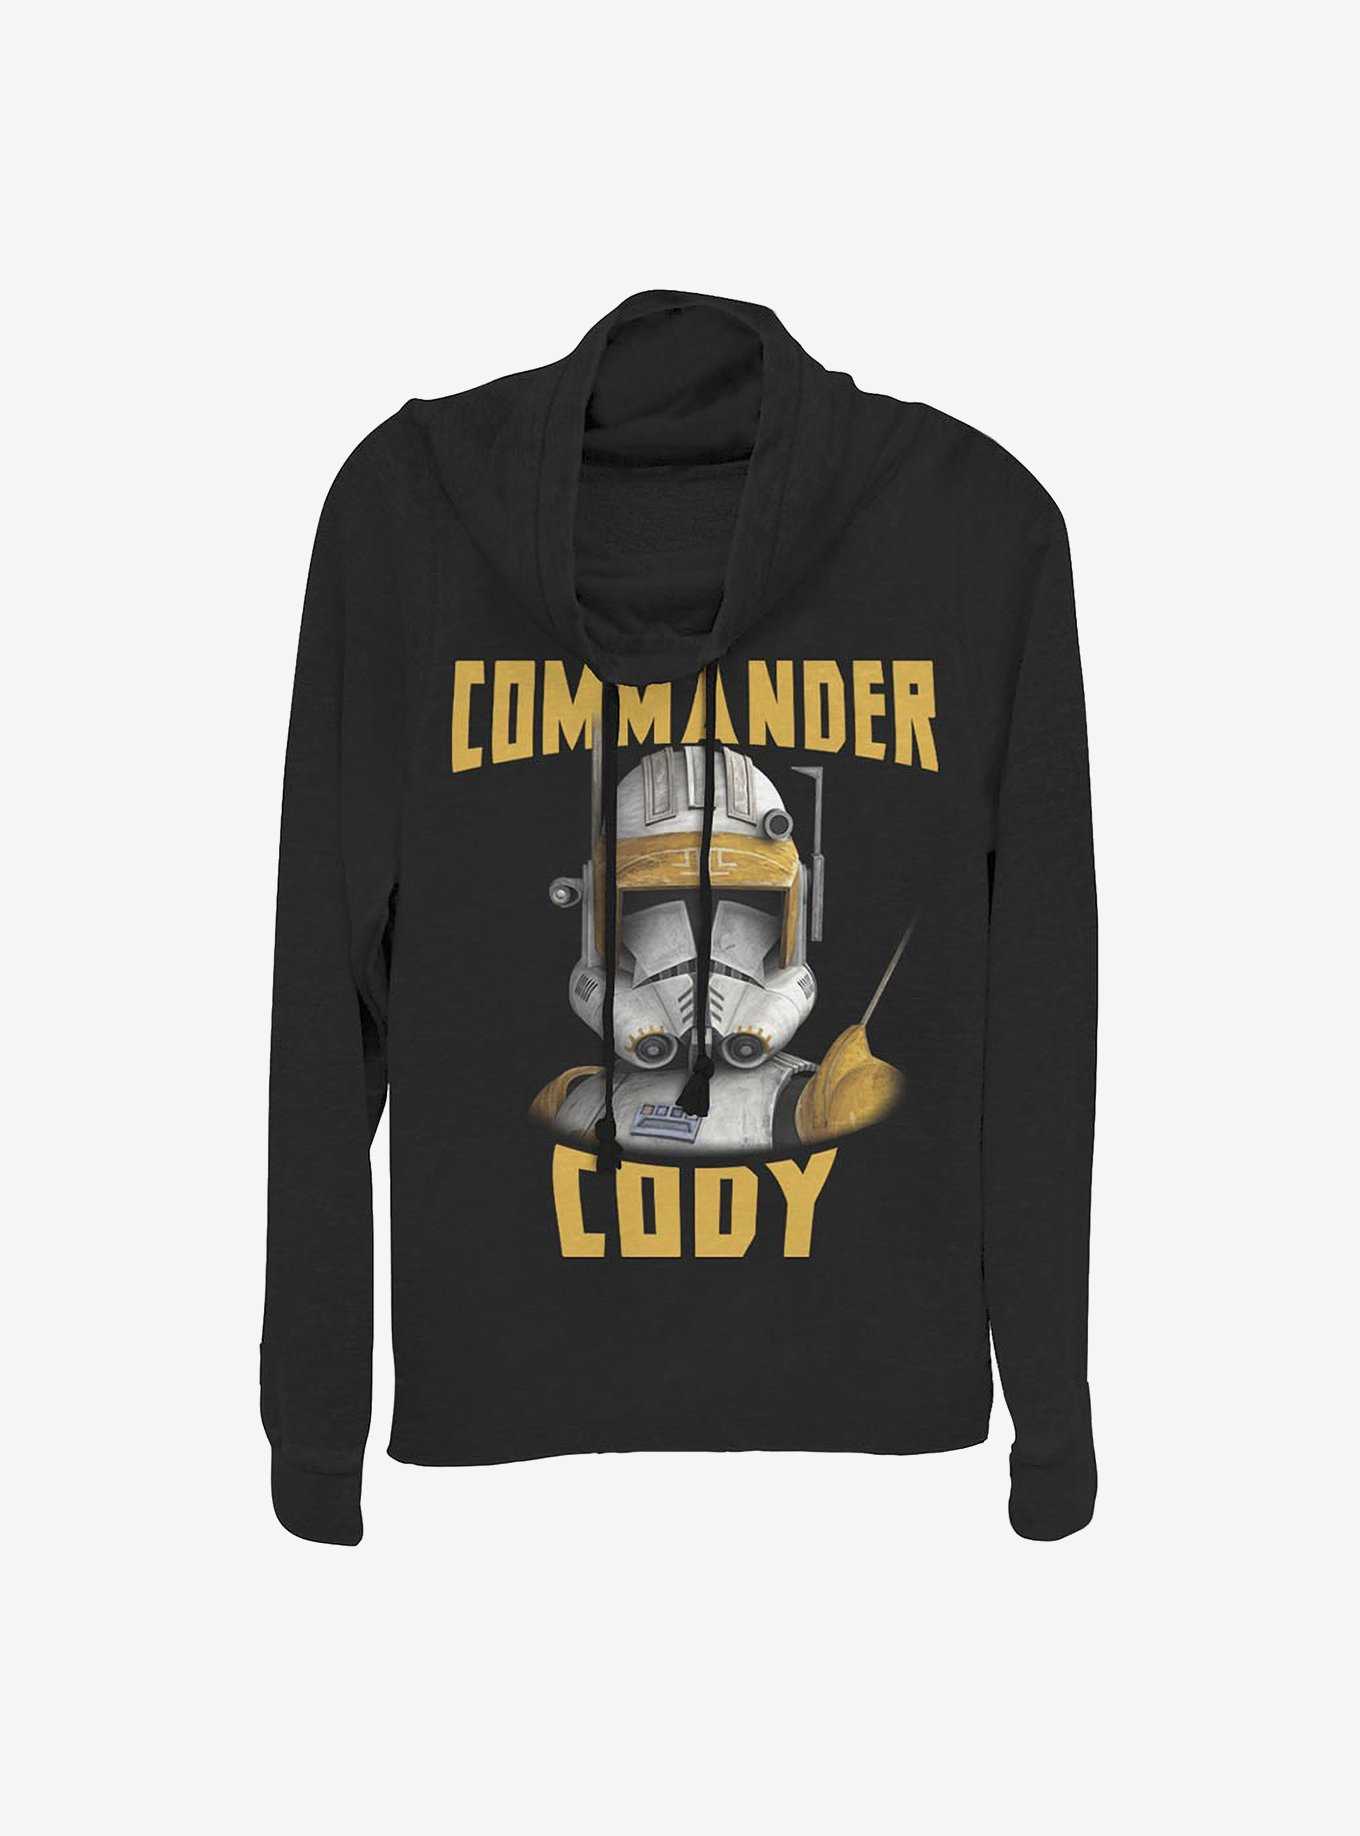 Star Wars: The Clone Wars Cody Face Cowlneck Long-Sleeve Girls Top, , hi-res